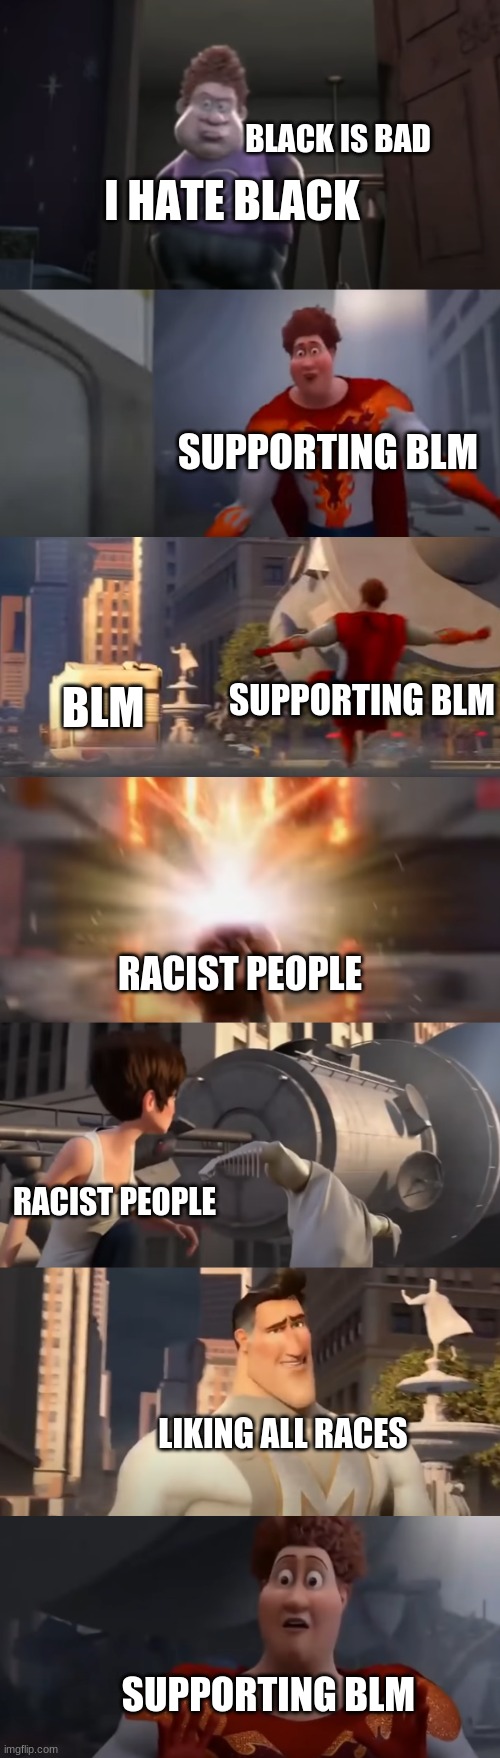 Dont be racist |  BLACK IS BAD; I HATE BLACK; SUPPORTING BLM; SUPPORTING BLM; BLM; RACIST PEOPLE; RACIST PEOPLE; LIKING ALL RACES; SUPPORTING BLM | image tagged in snotty boy glow up meme extended | made w/ Imgflip meme maker